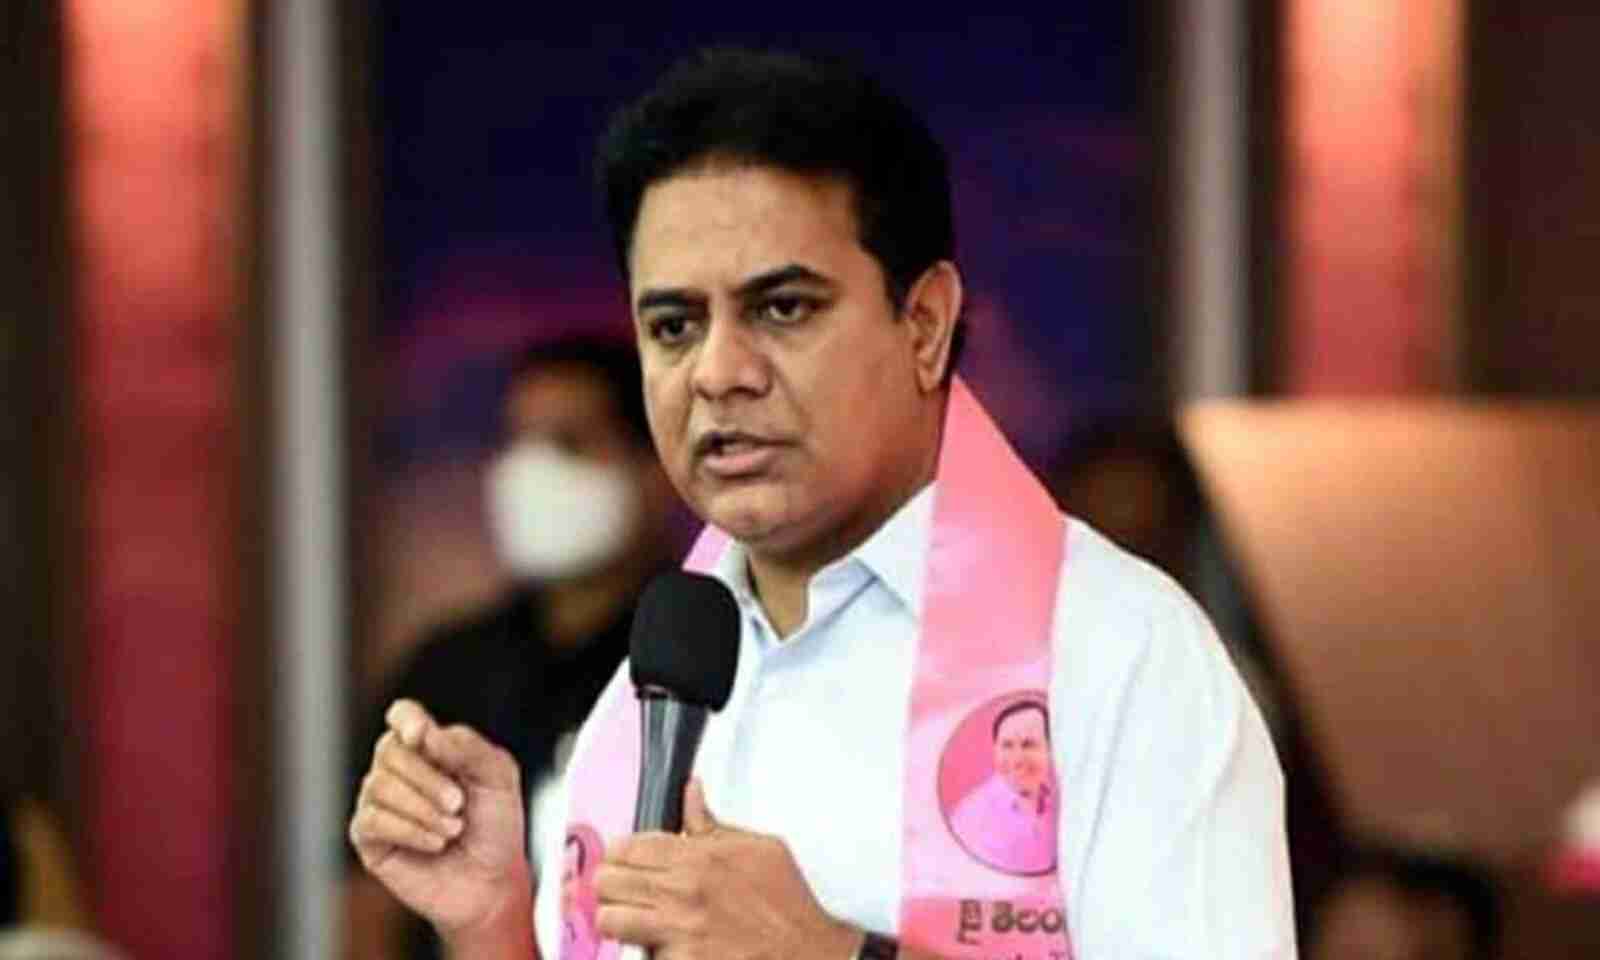 Modi in TS to sell state assets, not launch projects: KTR